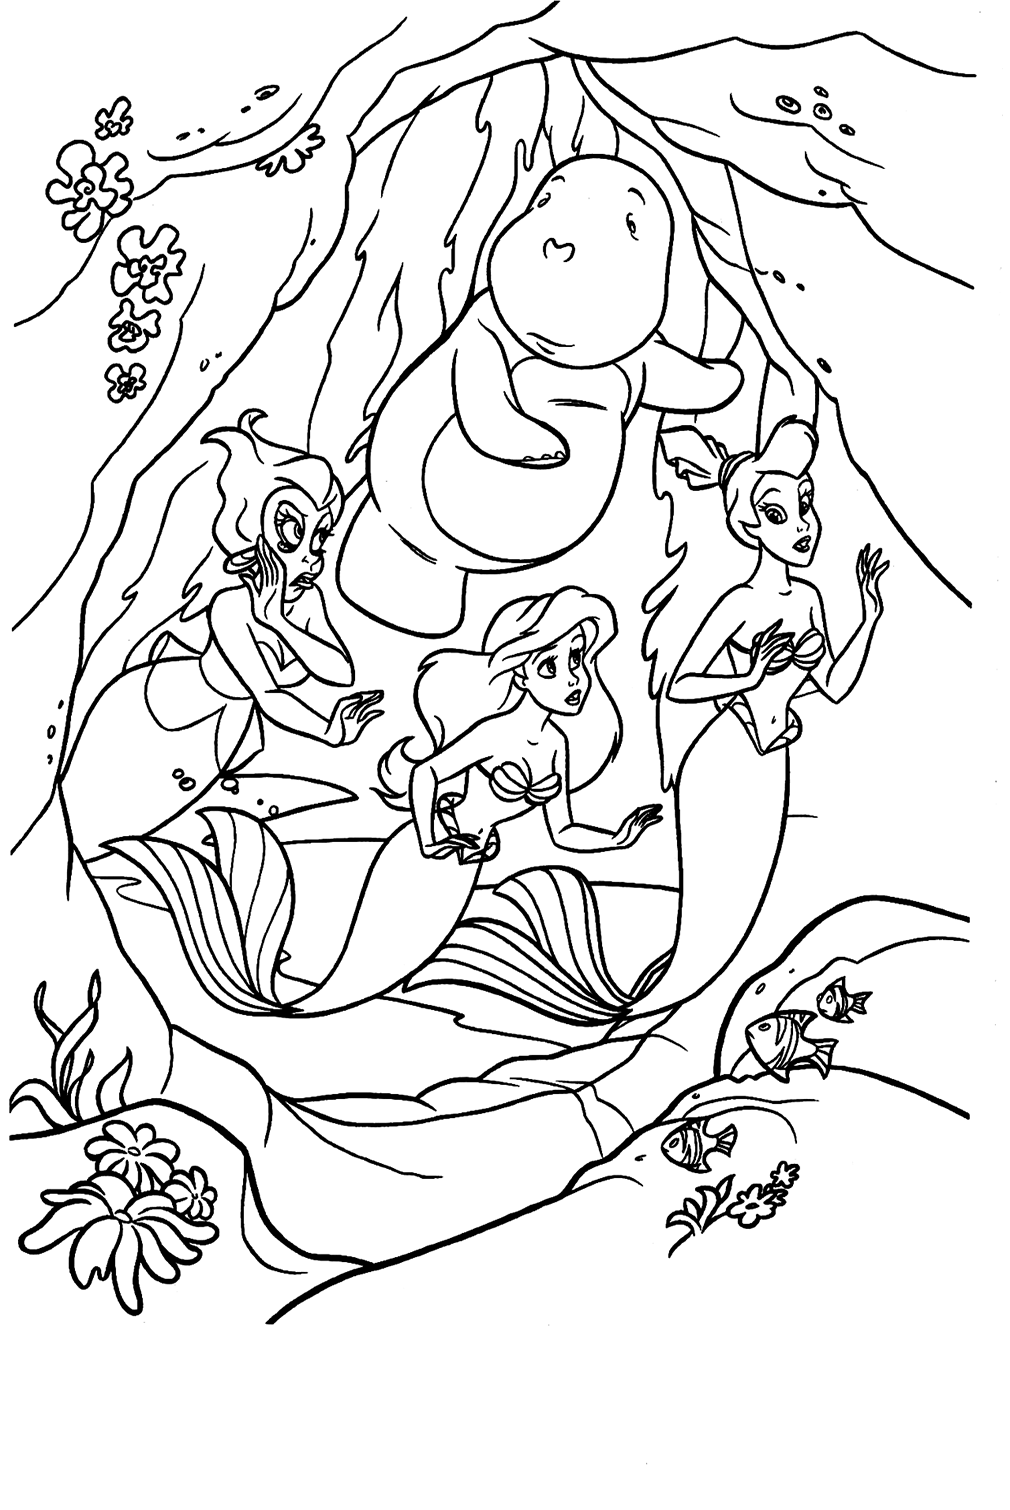 The Little Mermaid Coloring Pages Printable from The Little Mermaid